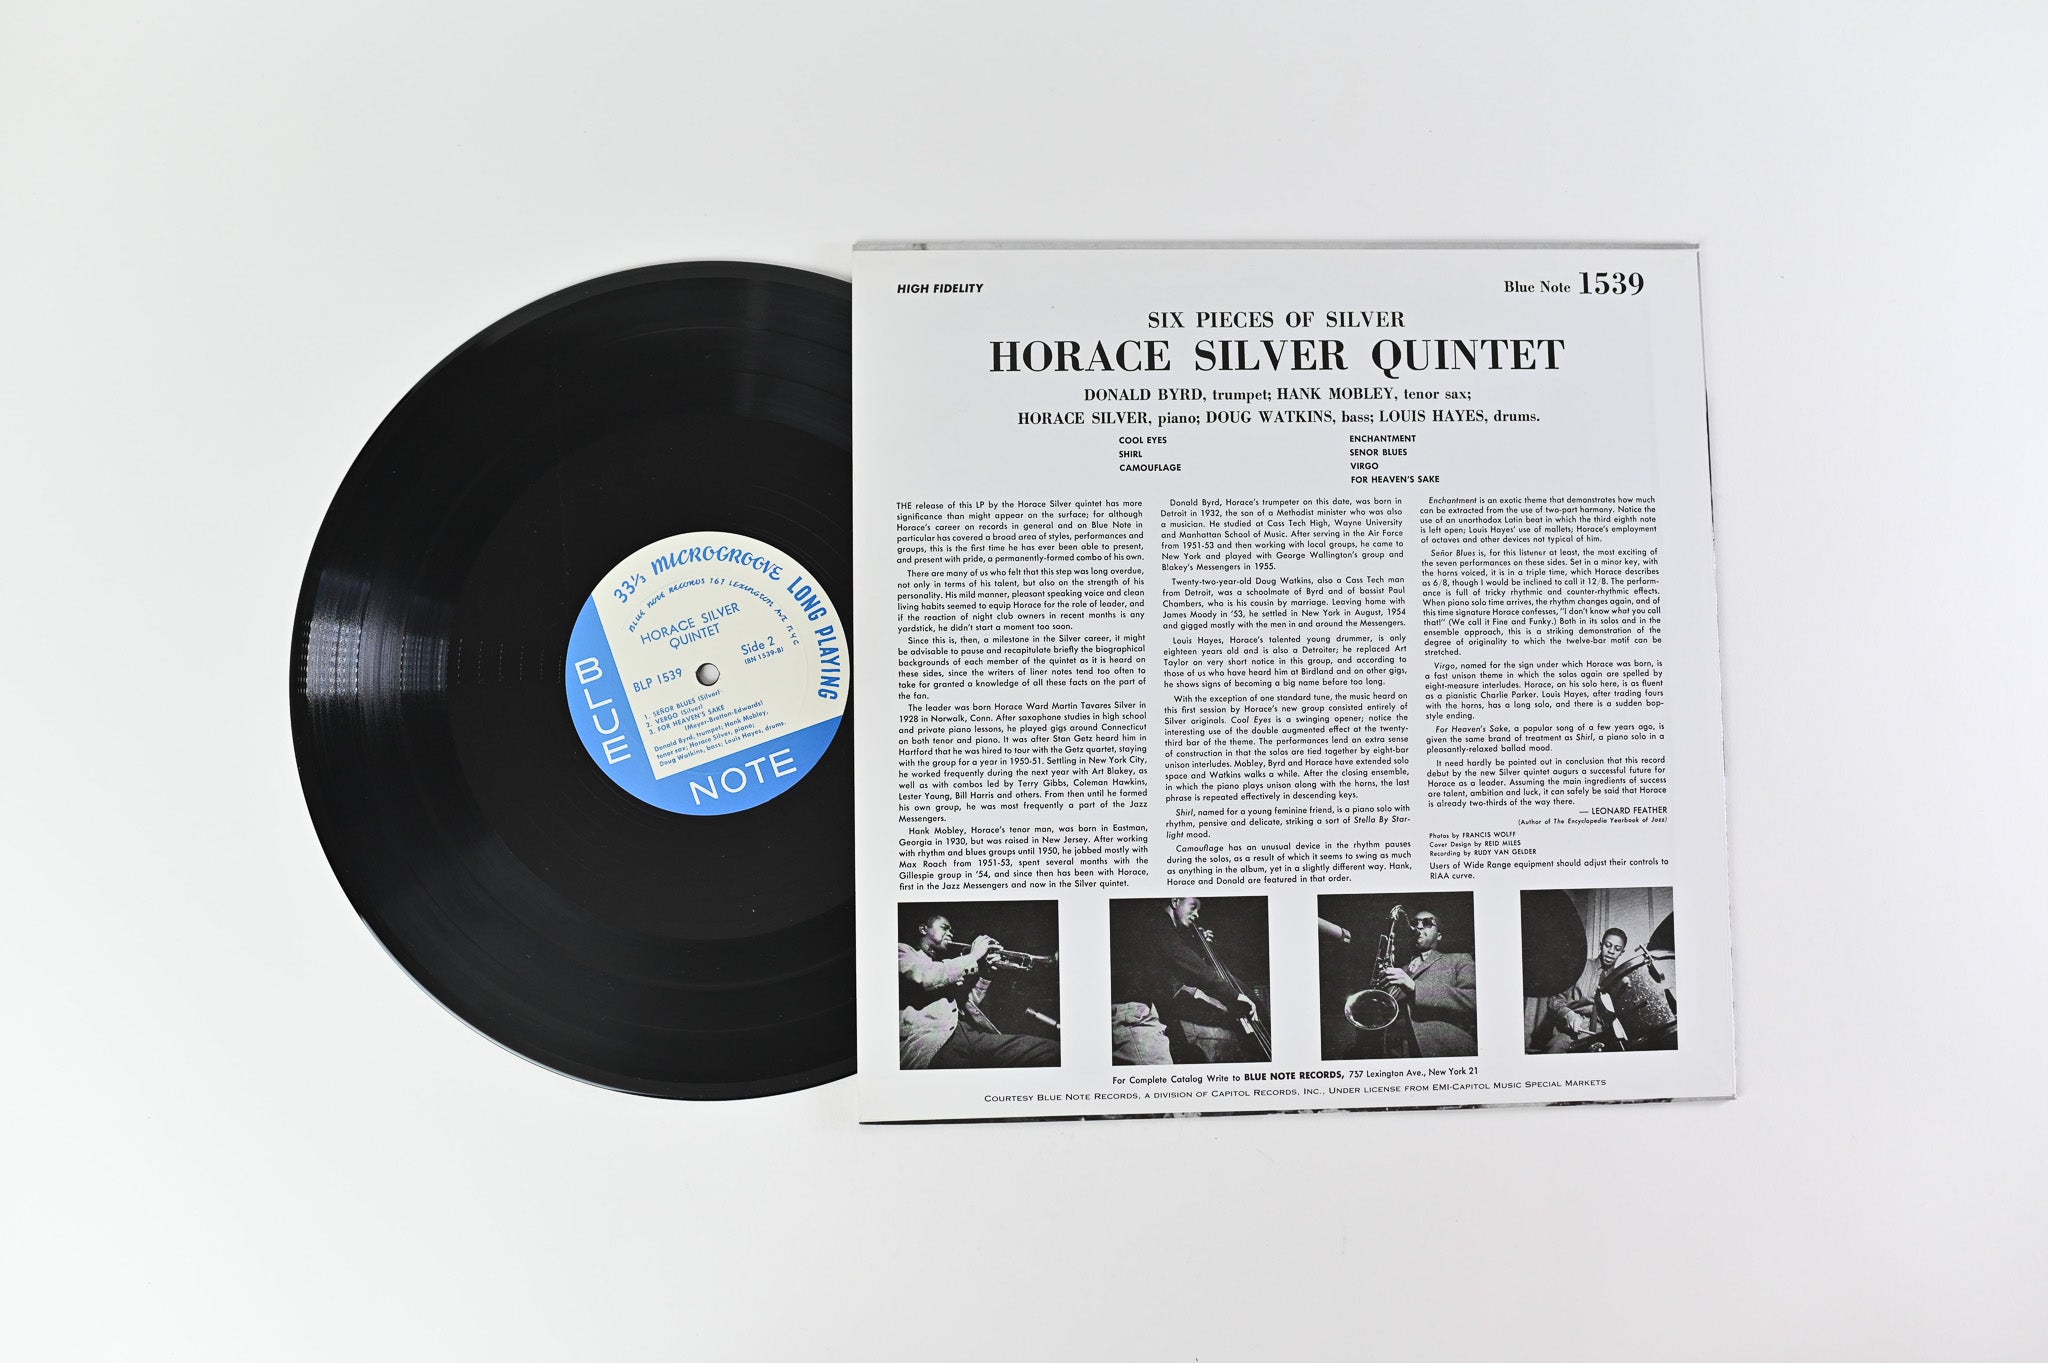 The Horace Silver Quintet - 6 Pieces Of Silver on Classic Records / Blue Note BLP 1539 Mono